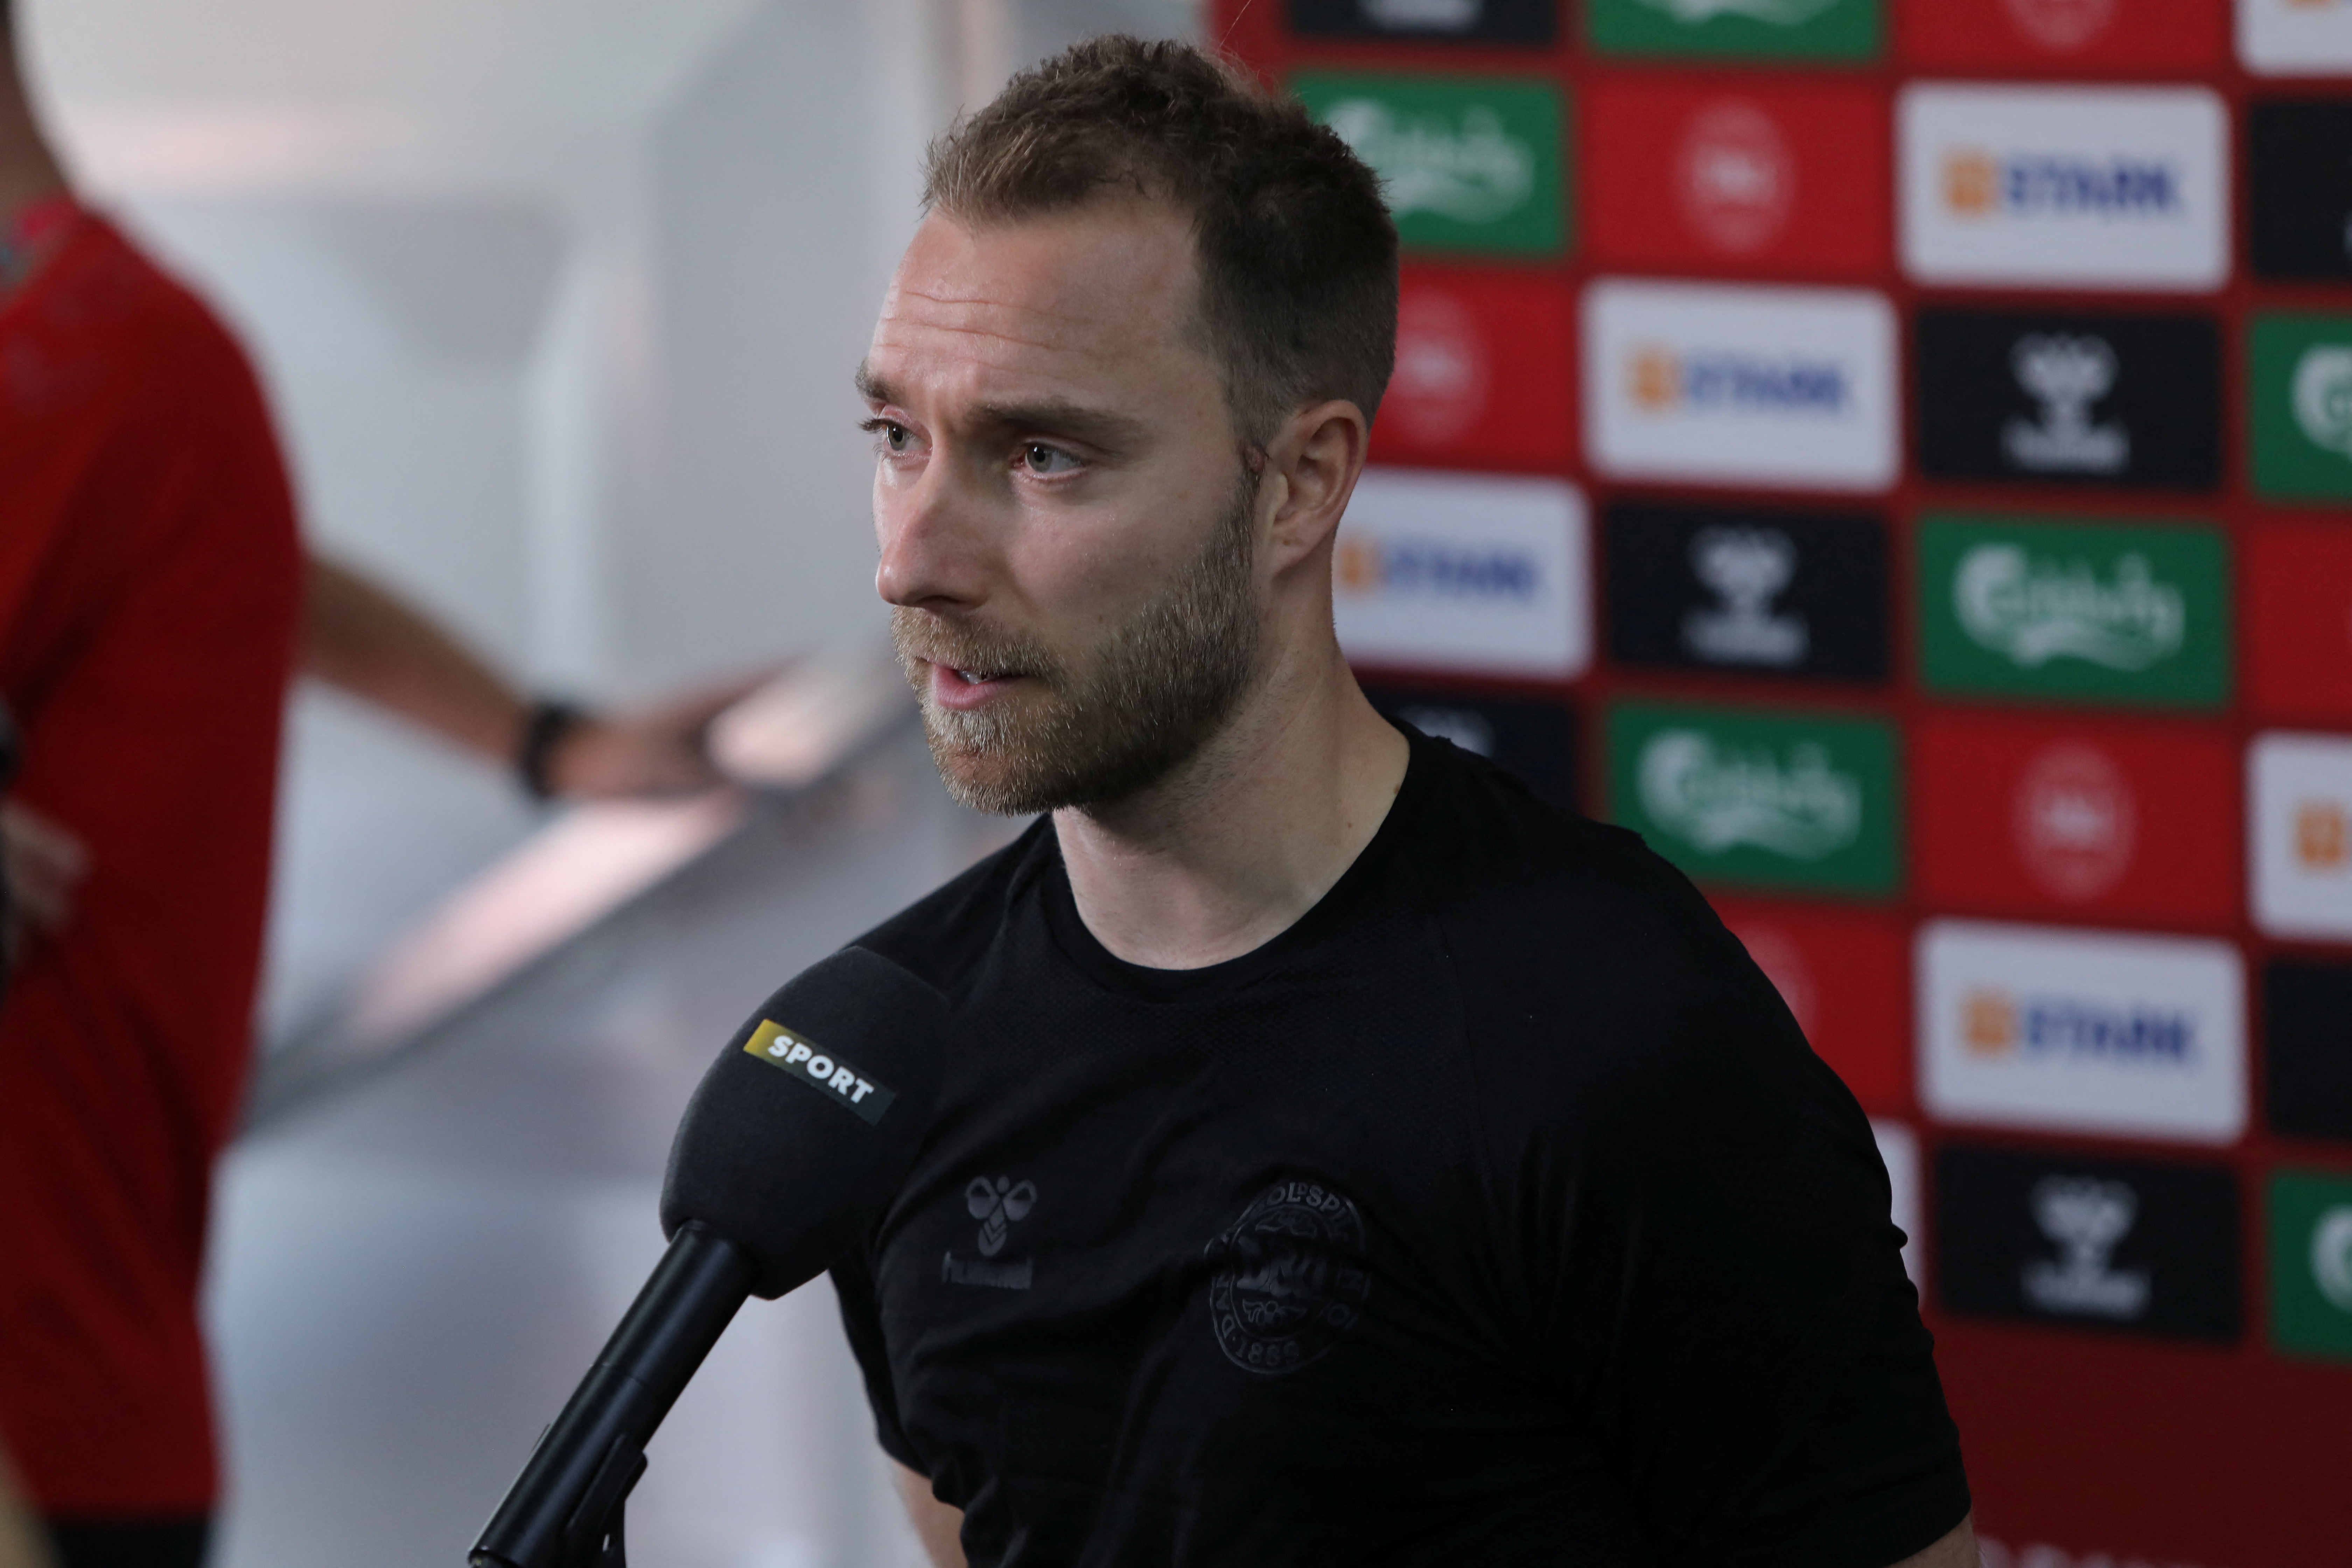 Denmark's Eriksen excited for return to World Cup